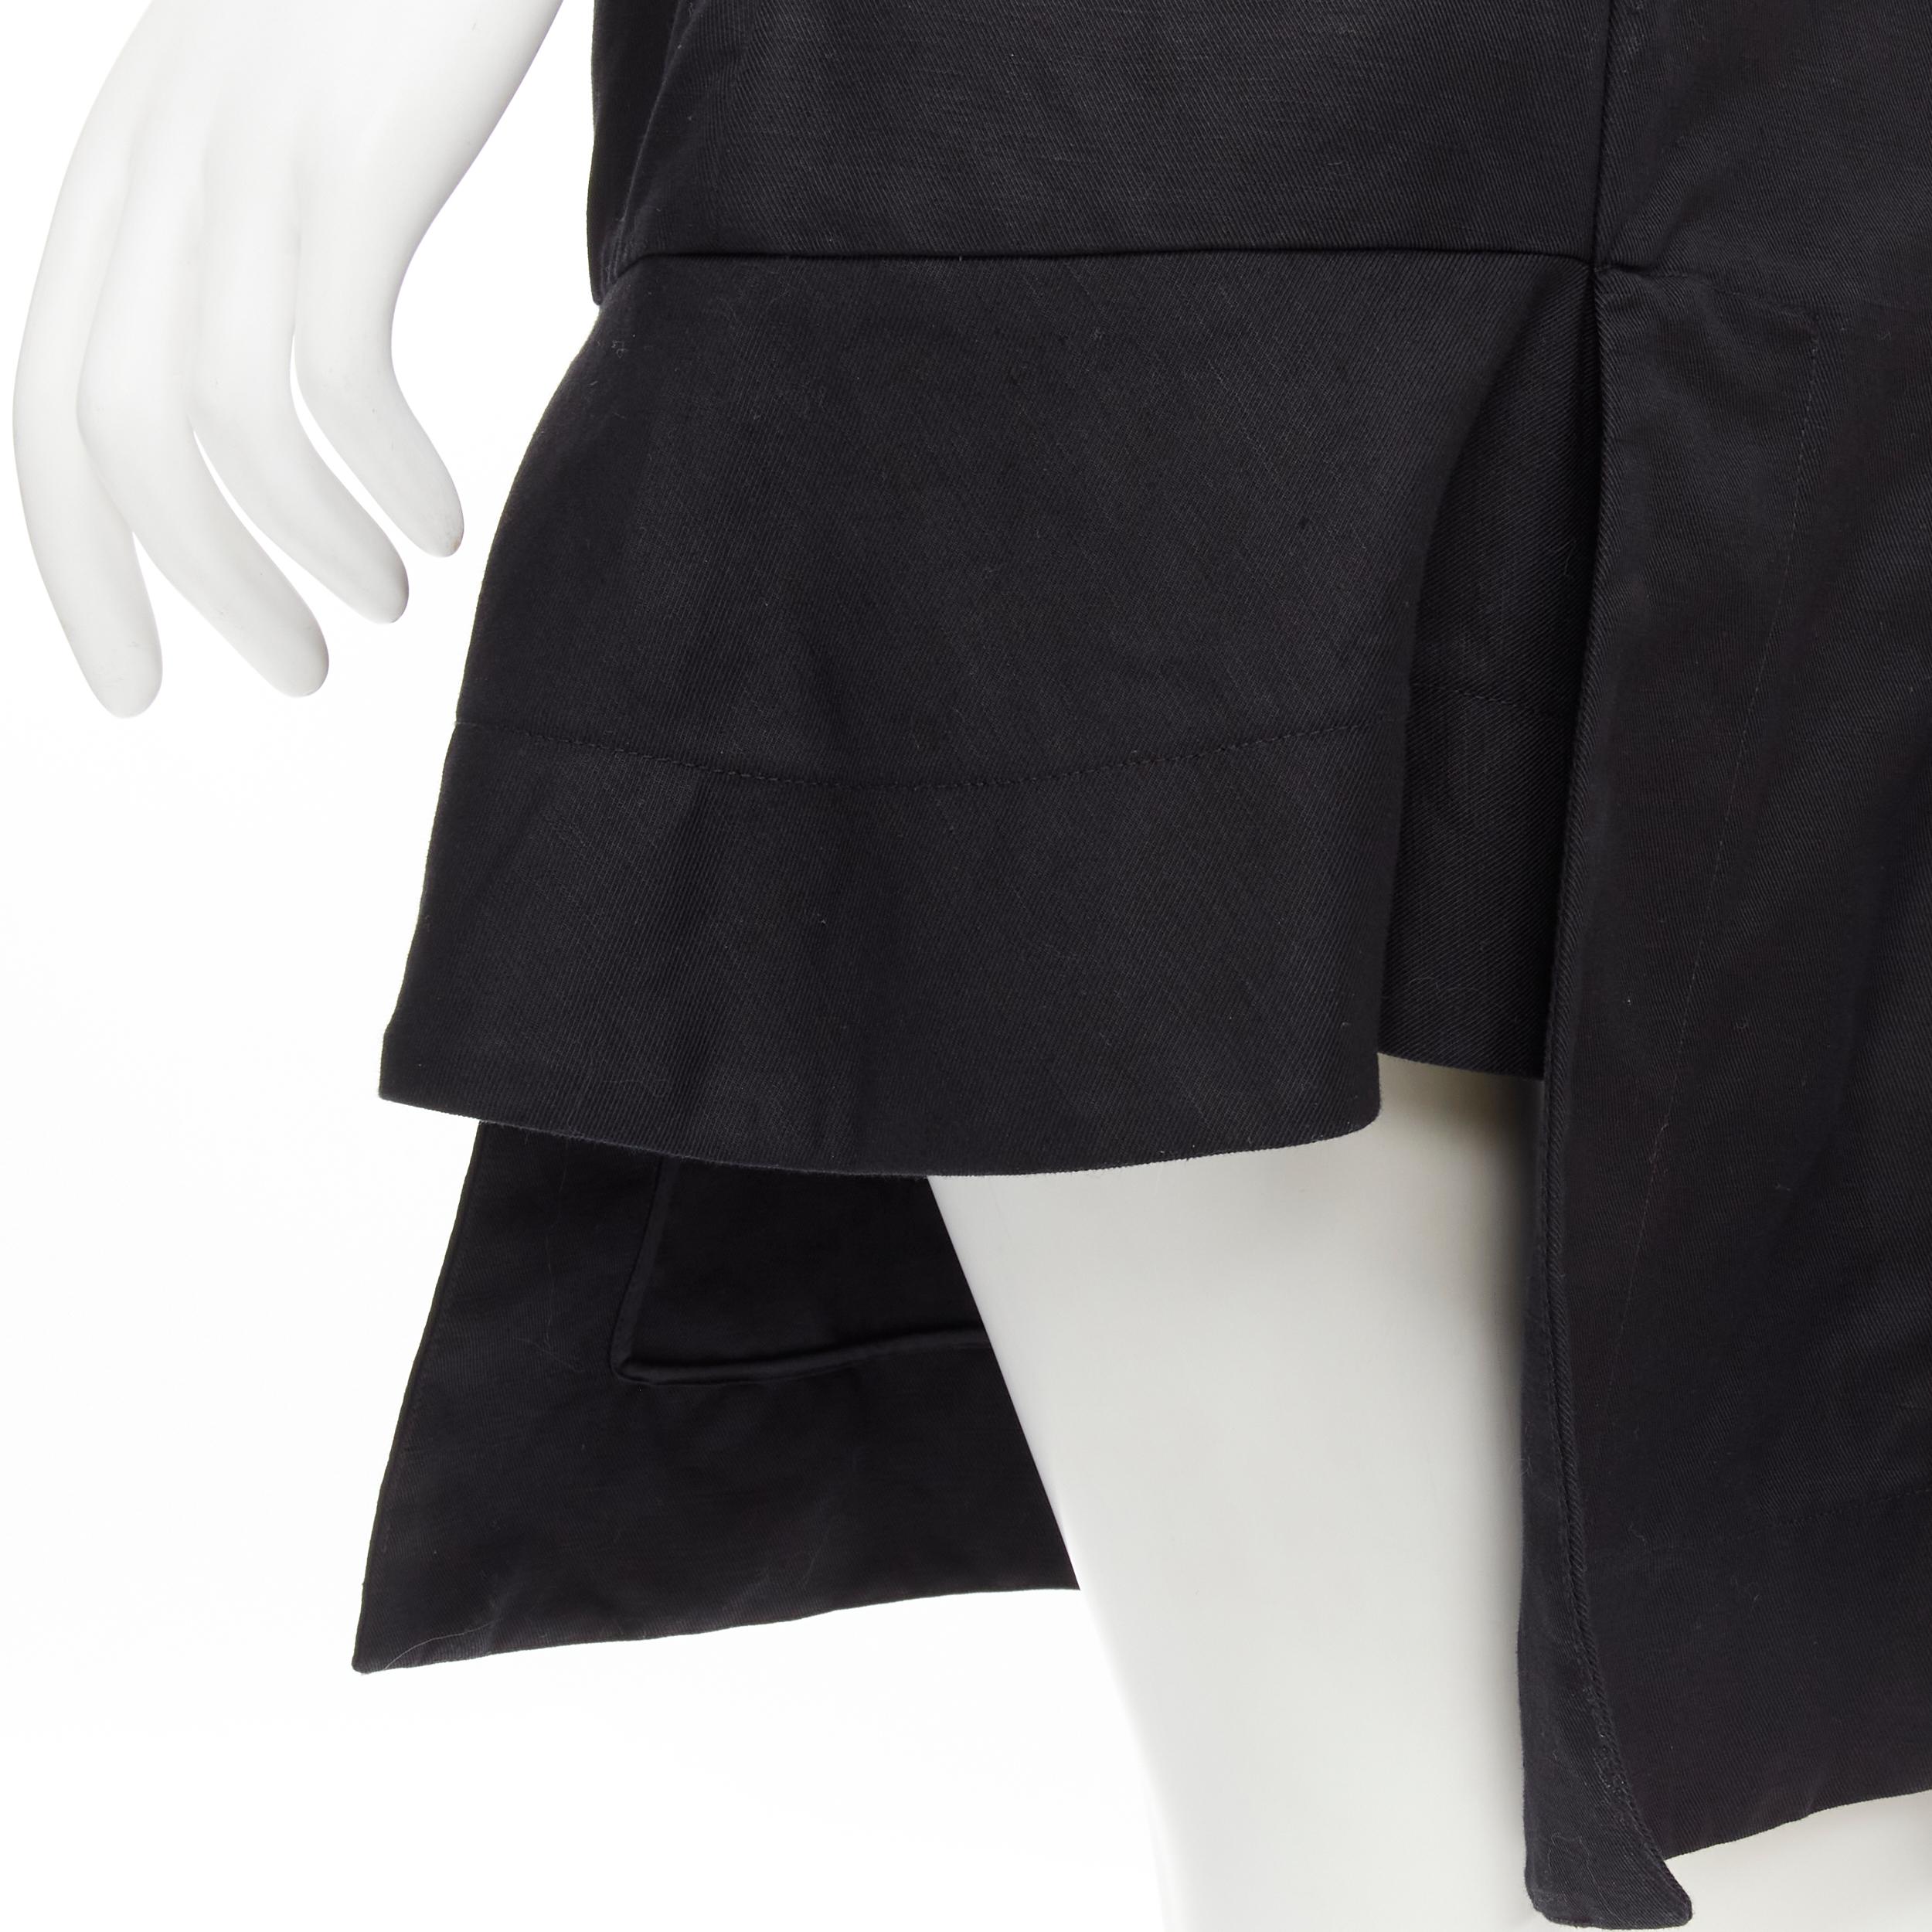 MARNI black cotton linen asymmetric step hem pleated flared skirt IT42 S
Reference: CELG/A00095
Brand: Marni
Material: Cotton, Linen
Color: Black
Pattern: Solid
Closure: Zip
Made in: Italy

CONDITION:
Condition: Excellent, this item was pre-owned